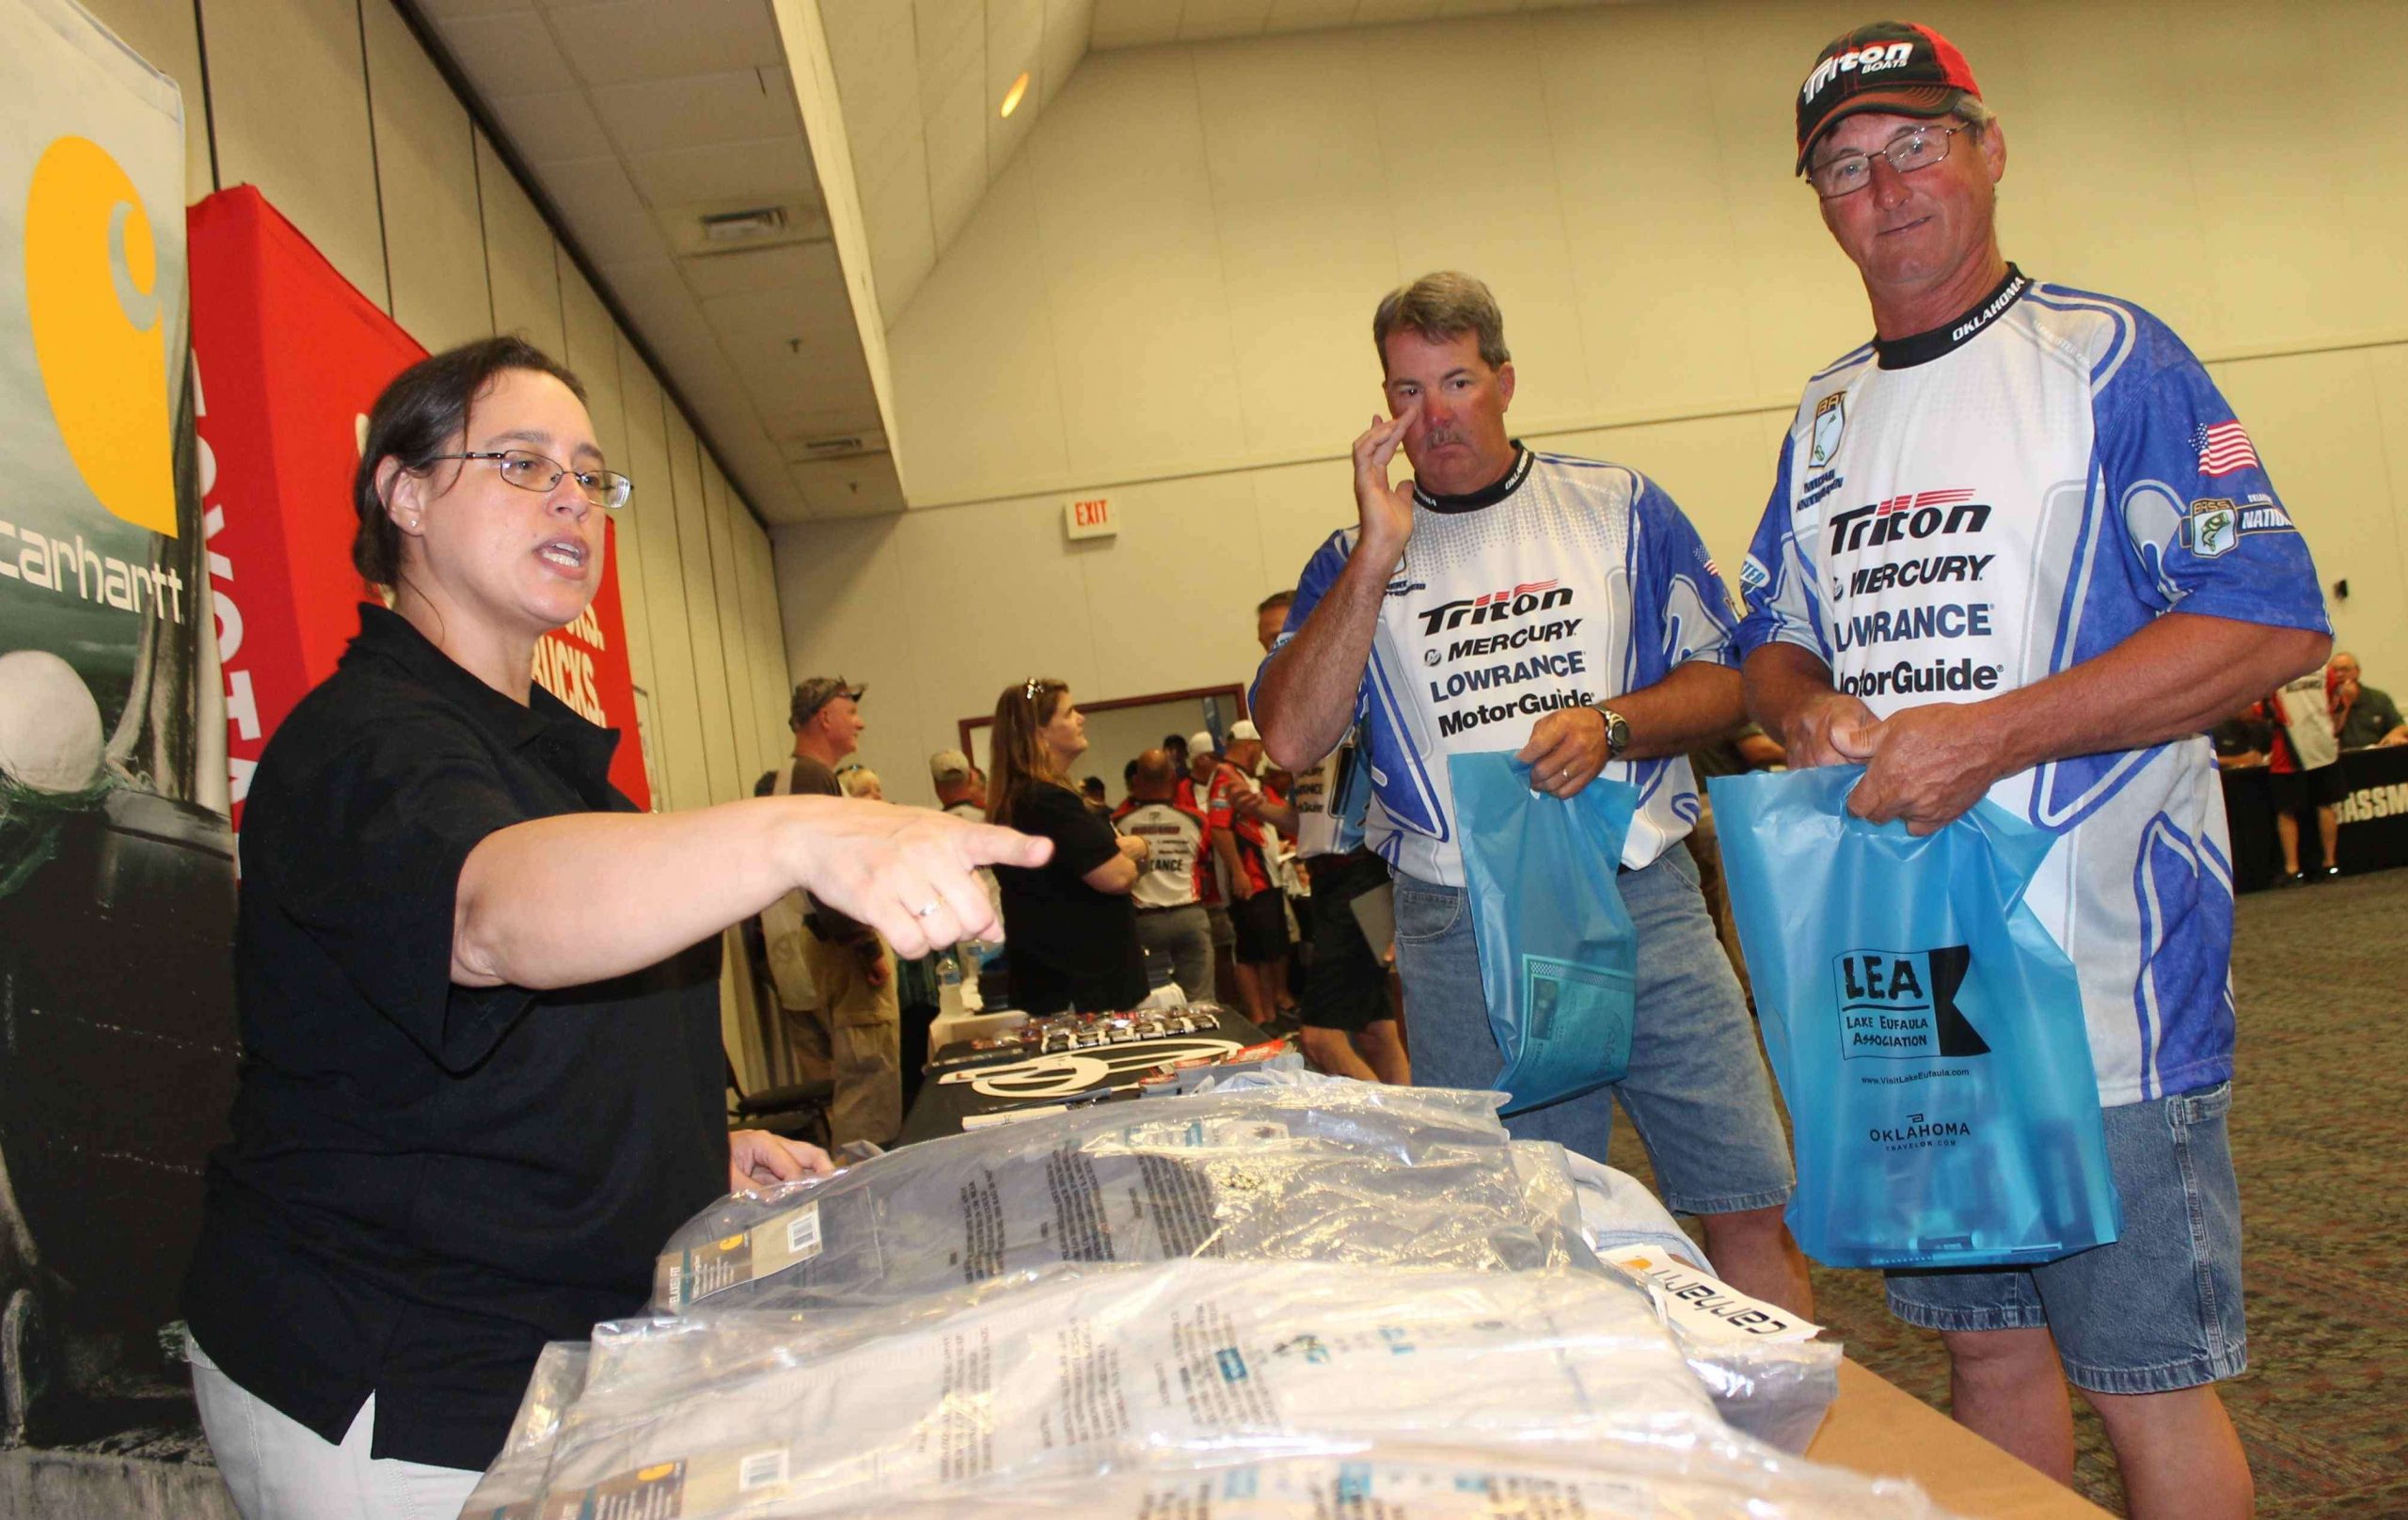 Oklahoma anglers Robert Degreffenreid (left) and Mike Anthamatten step up to pick out some Carhartt gear.
